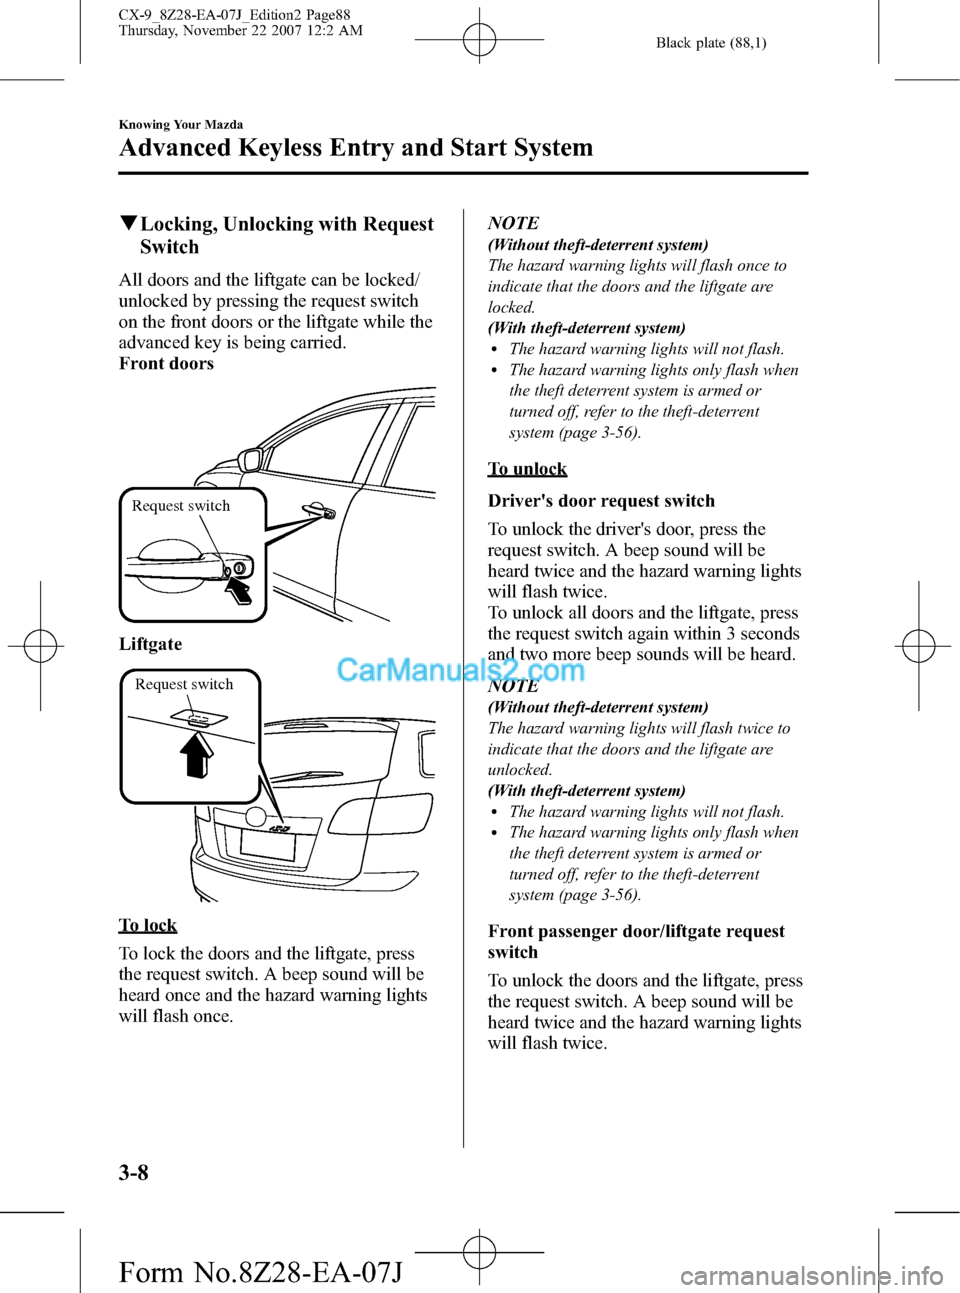 MAZDA MODEL CX-9 2008  Owners Manual (in English) Black plate (88,1)
qLocking, Unlocking with Request
Switch
All doors and the liftgate can be locked/
unlocked by pressing the request switch
on the front doors or the liftgate while the
advanced key i